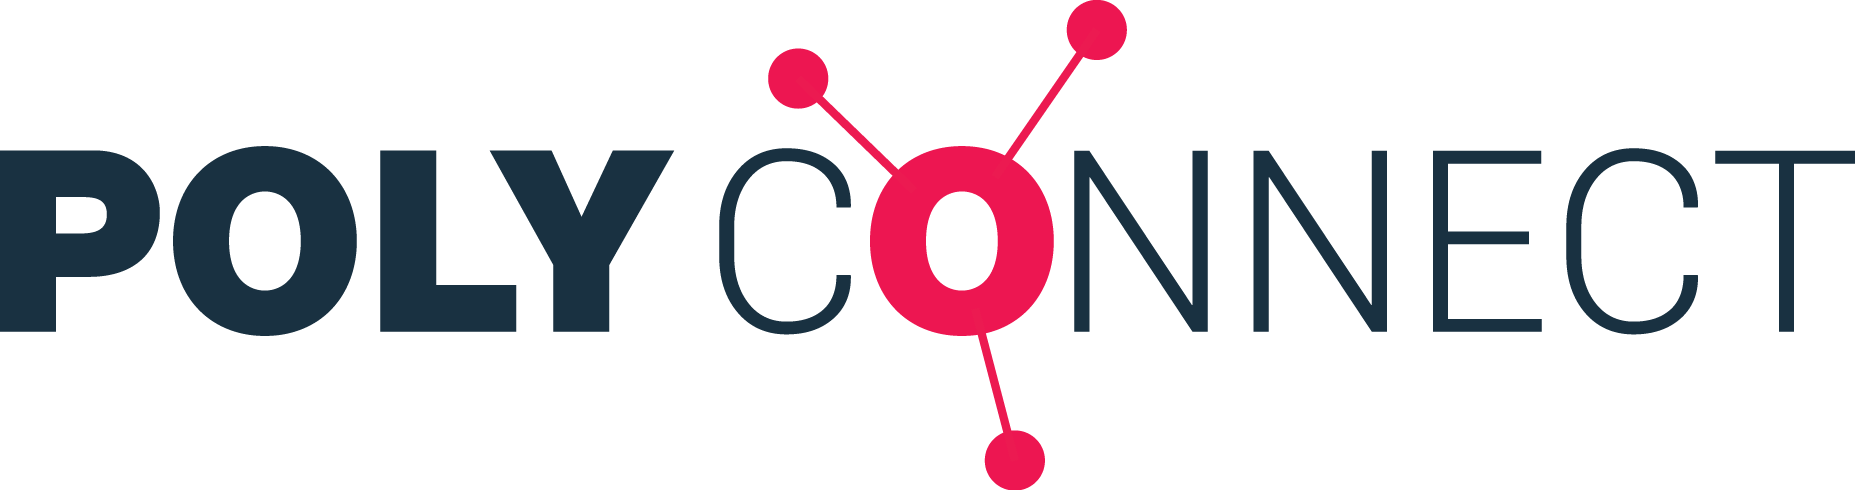 Polyconnect - Telecom and Energy Acccessories Brand